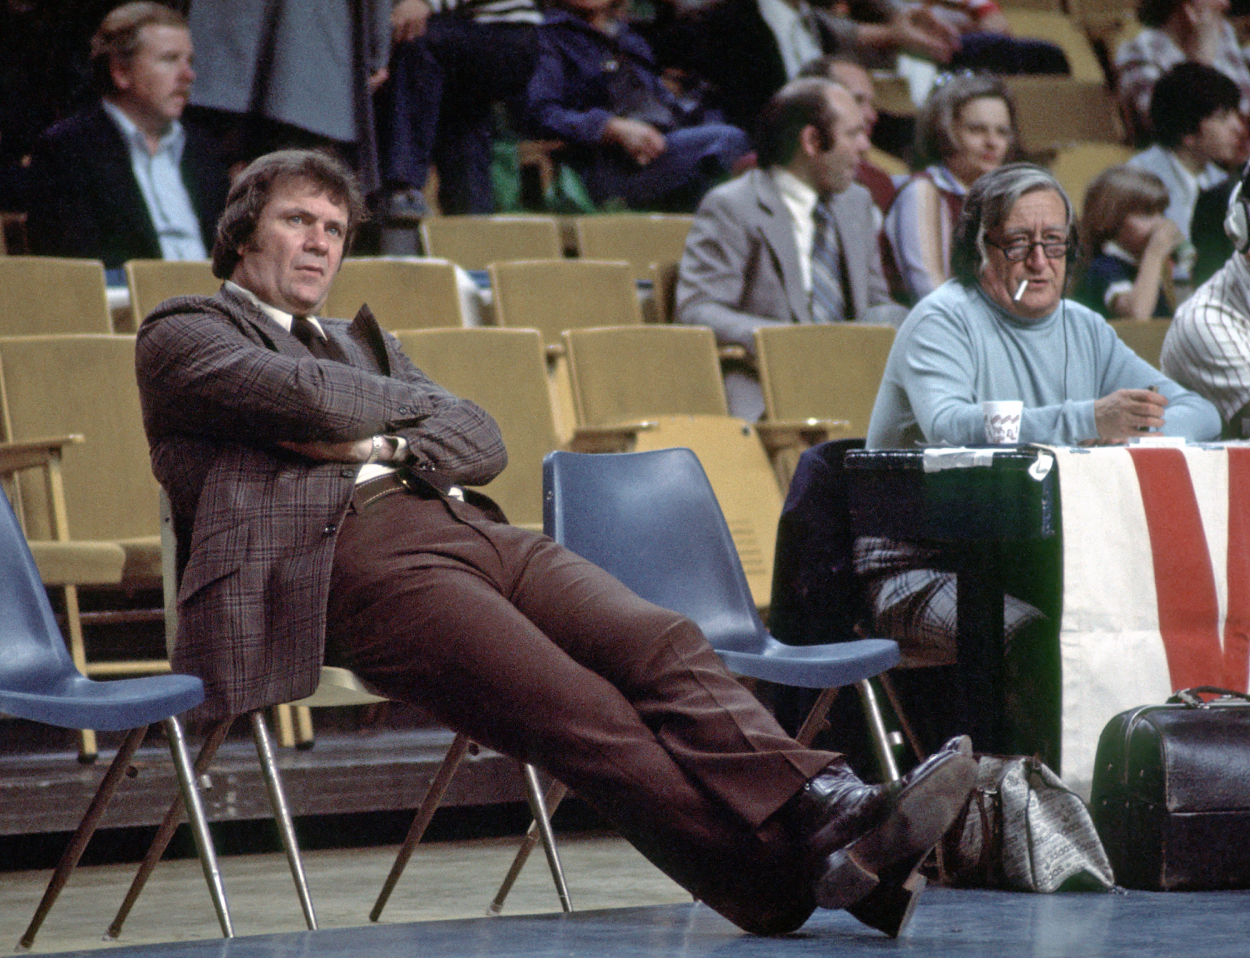 Head coach Tom Heinsohn of the Boston Celtics sits on a chair on the sideline before a game against the Buffalo Braves as Celtics radio announcer Johnny Most looks on.